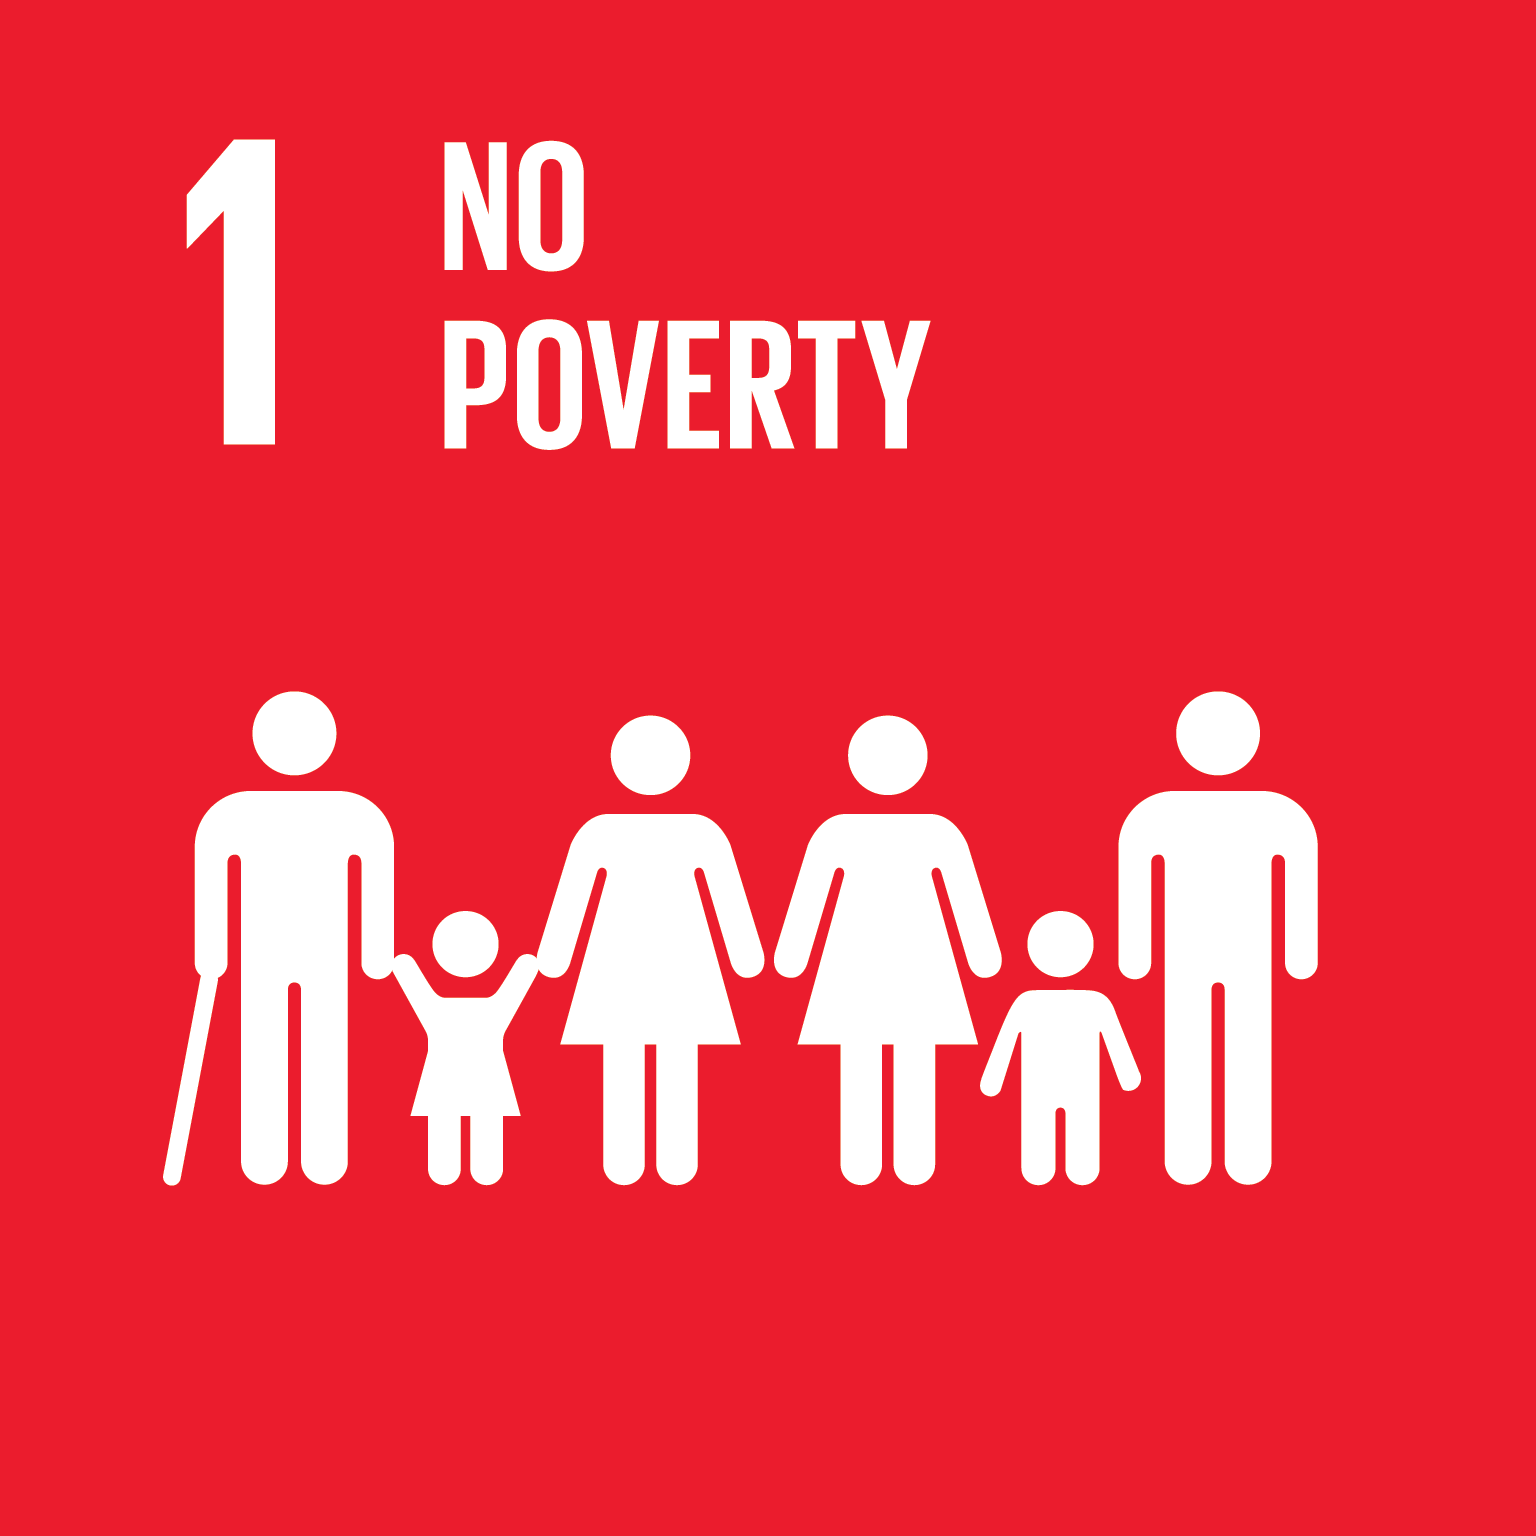 icon for Goal 1 - End poverty in all its forms everywhere